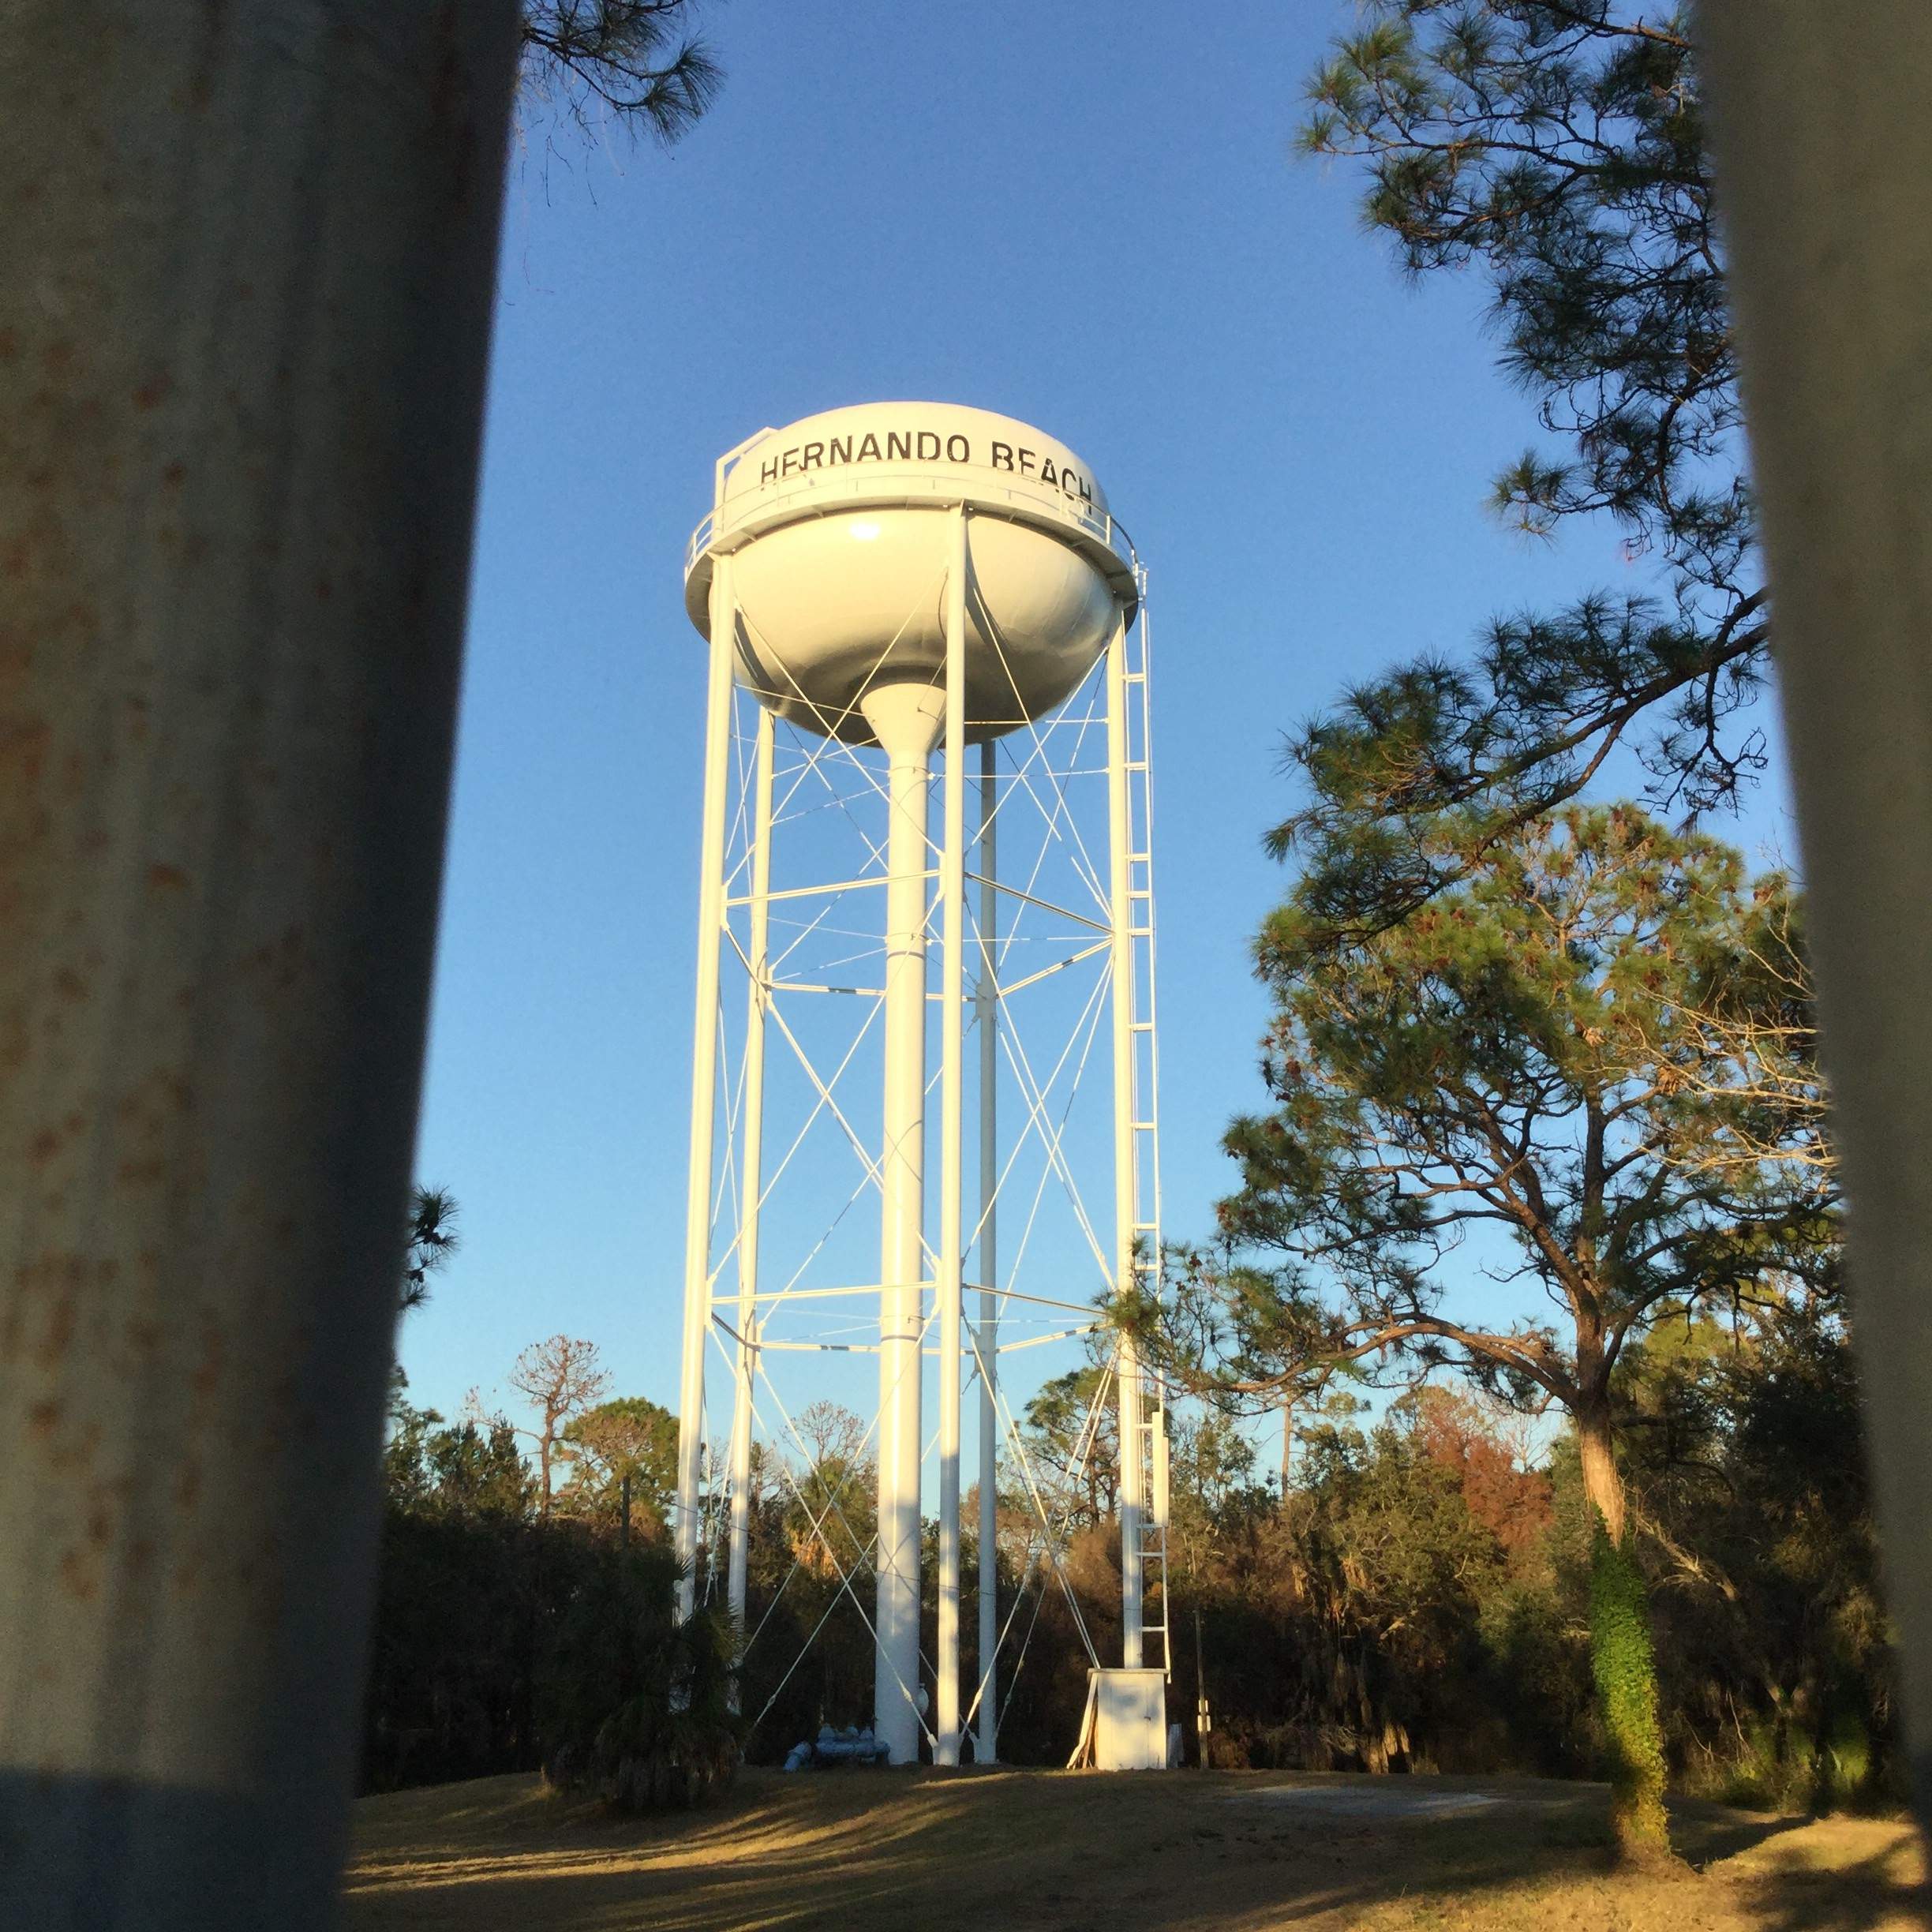 Hernando Beach water tower to stay in place | tbo.com